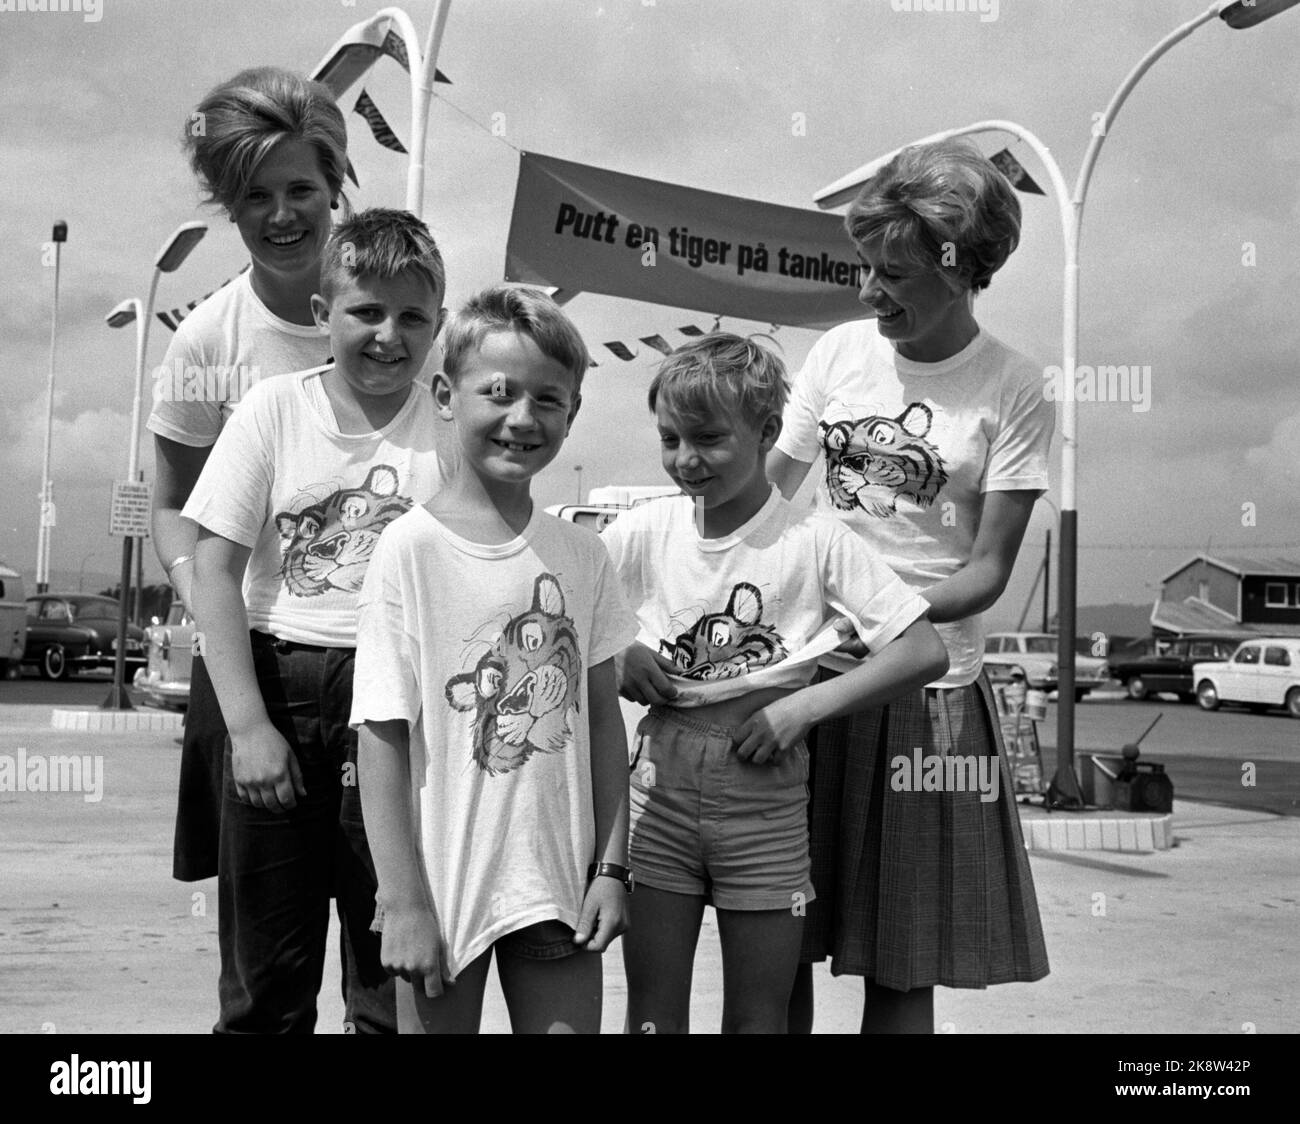 Oslo in the summer of 1965 The oil company Esso has adventurous success with its campaign to launch a new gasoline. The slogan 'Put a tiger on the tank' accompanied by Strøtarticles such as T-shirts, toys and tiger sweats has gone straight home with the youngest members of the family. And since it is the kids who decide when to stop when on holiday trips in the car, the road is not long to the nearest Esso station ... Here, satisfied Fere-kids are dressed up in Tiger jerseys. The slogan in the background. Photo: Børretzen / Current / NTB Stock Photo